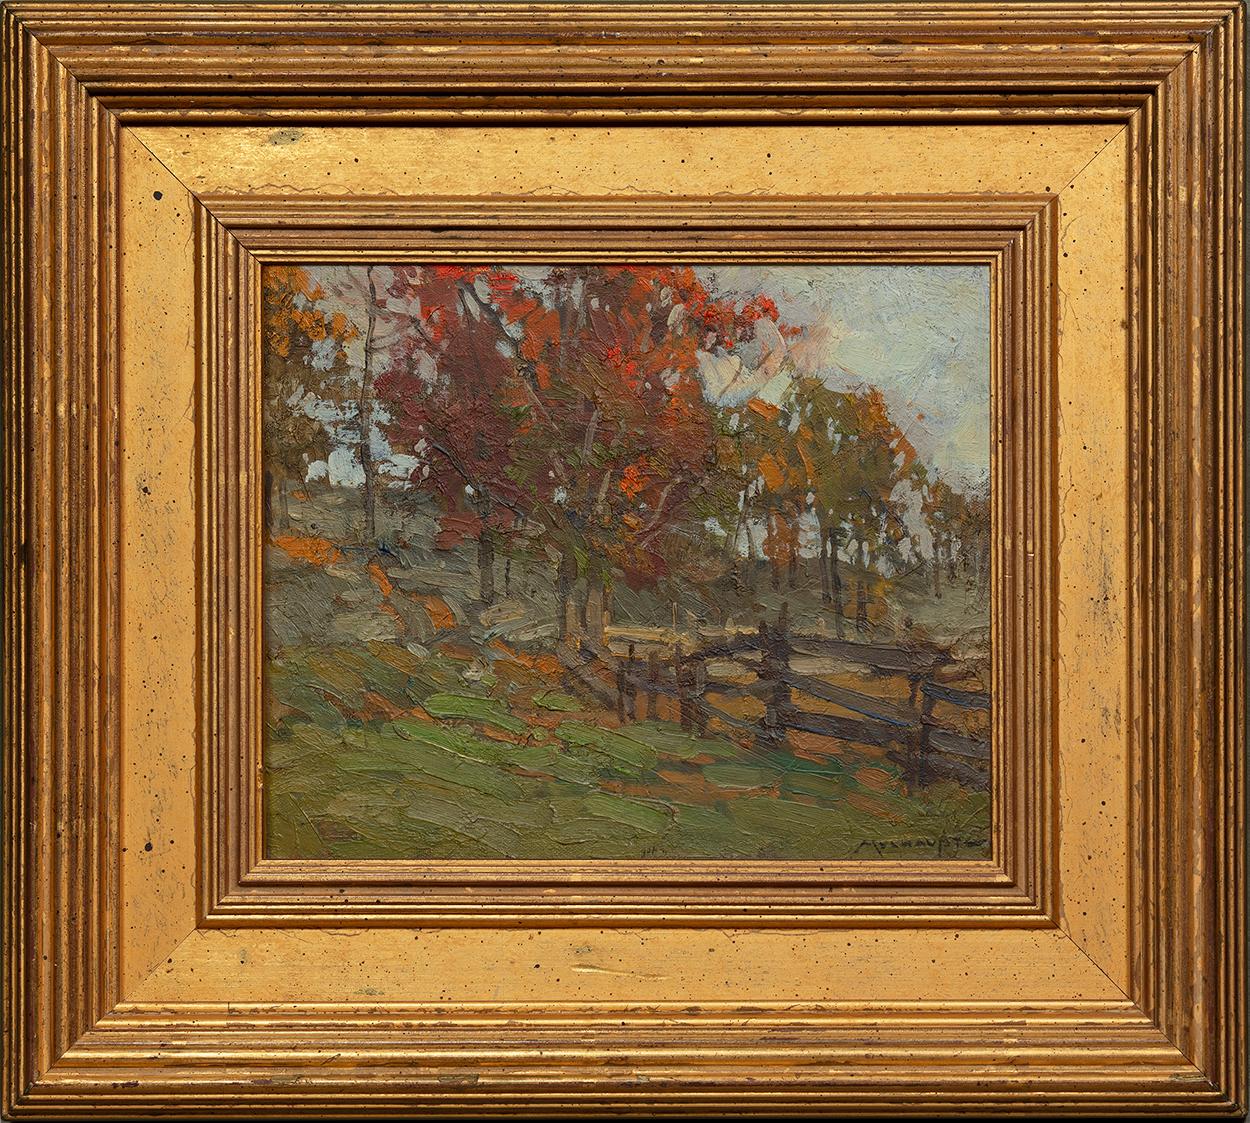 Hagstrom’s Pasture, Cape Ann  - Painting by Frederick J. Mulhaupt